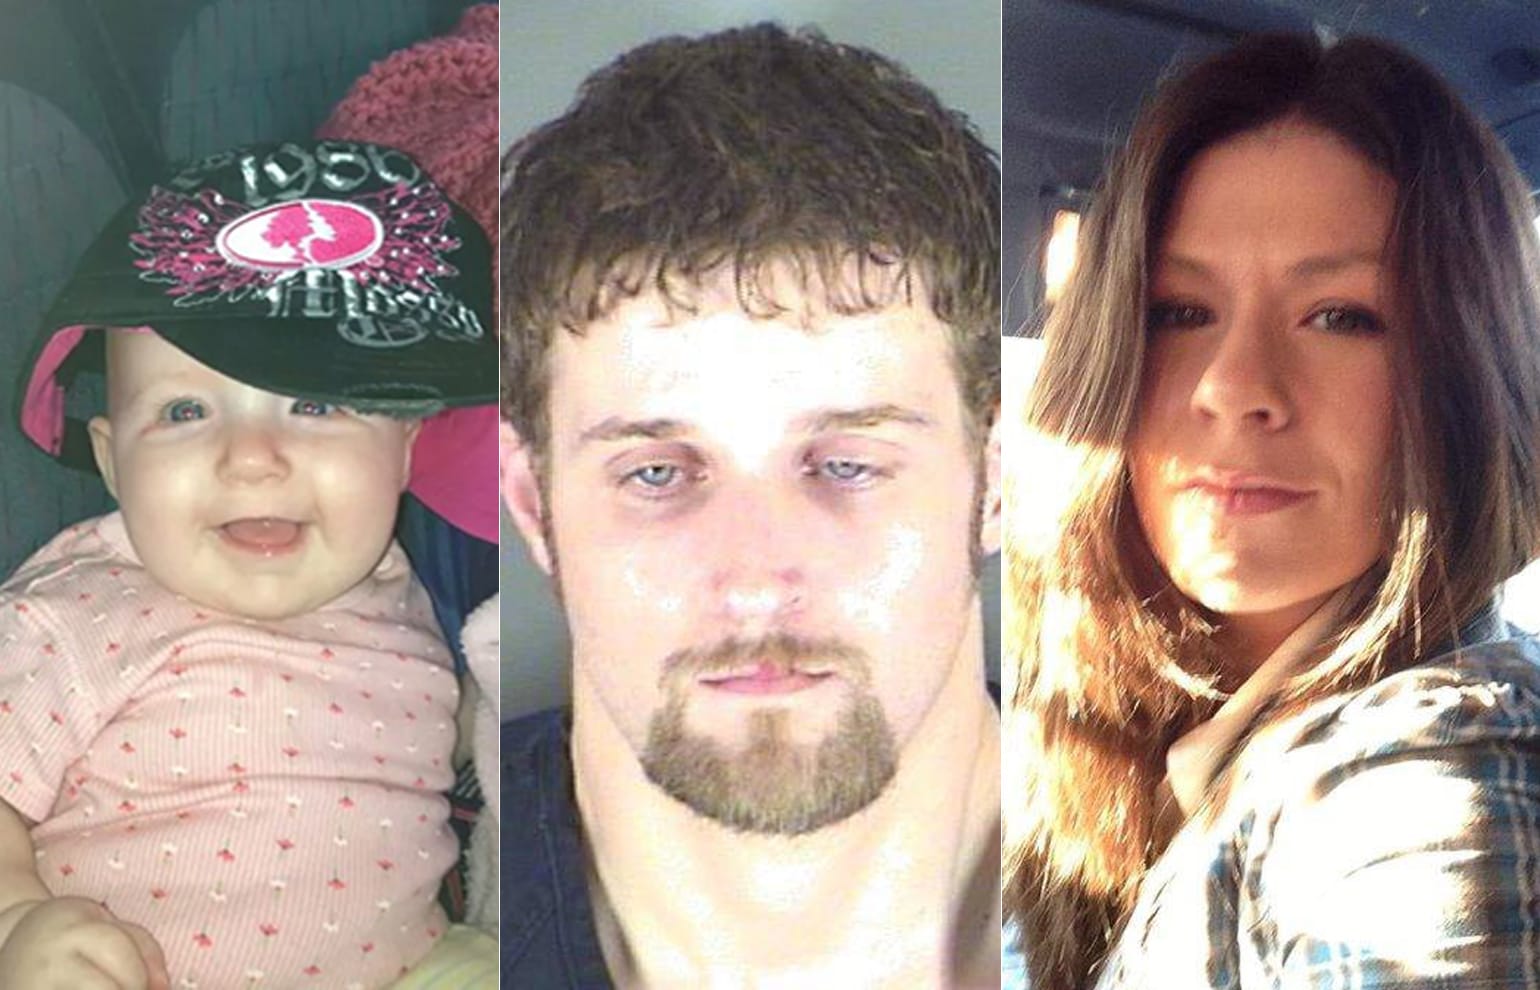 Authorities are asking the public to help find a 16-month-old girl, Ella Jean Perigo, who's been missing for more than a couple of weeks. She's believed to be with her parents, Charles M. Olsen-Perigo, 28, and Heidi L. Wilson, 31. Clark County sheriff's Sgt. Alex Schoening said Child Protective Services contacted the sheriff's office, concerned about the baby because in the past her parents have been homeless and unable to meet the baby's basic needs.